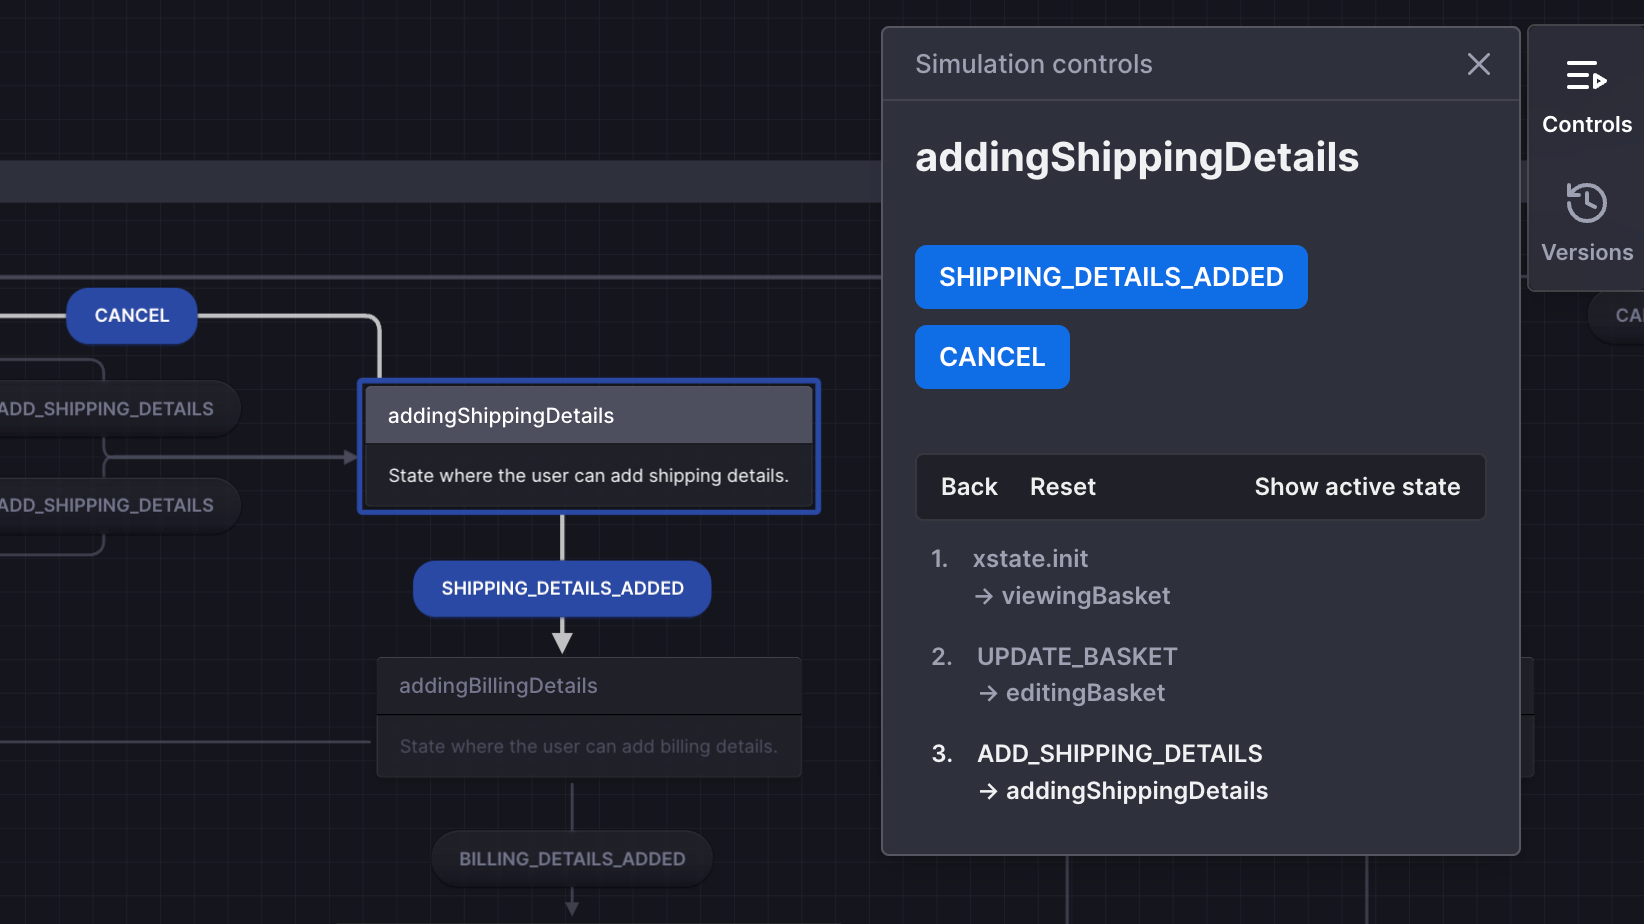 Controls panel in simulate mode showing event buttons for shipping_details_added and cancel. The log has the options for Back, Reset, and Show active state, and the log list is a numbered list of events and their target states.